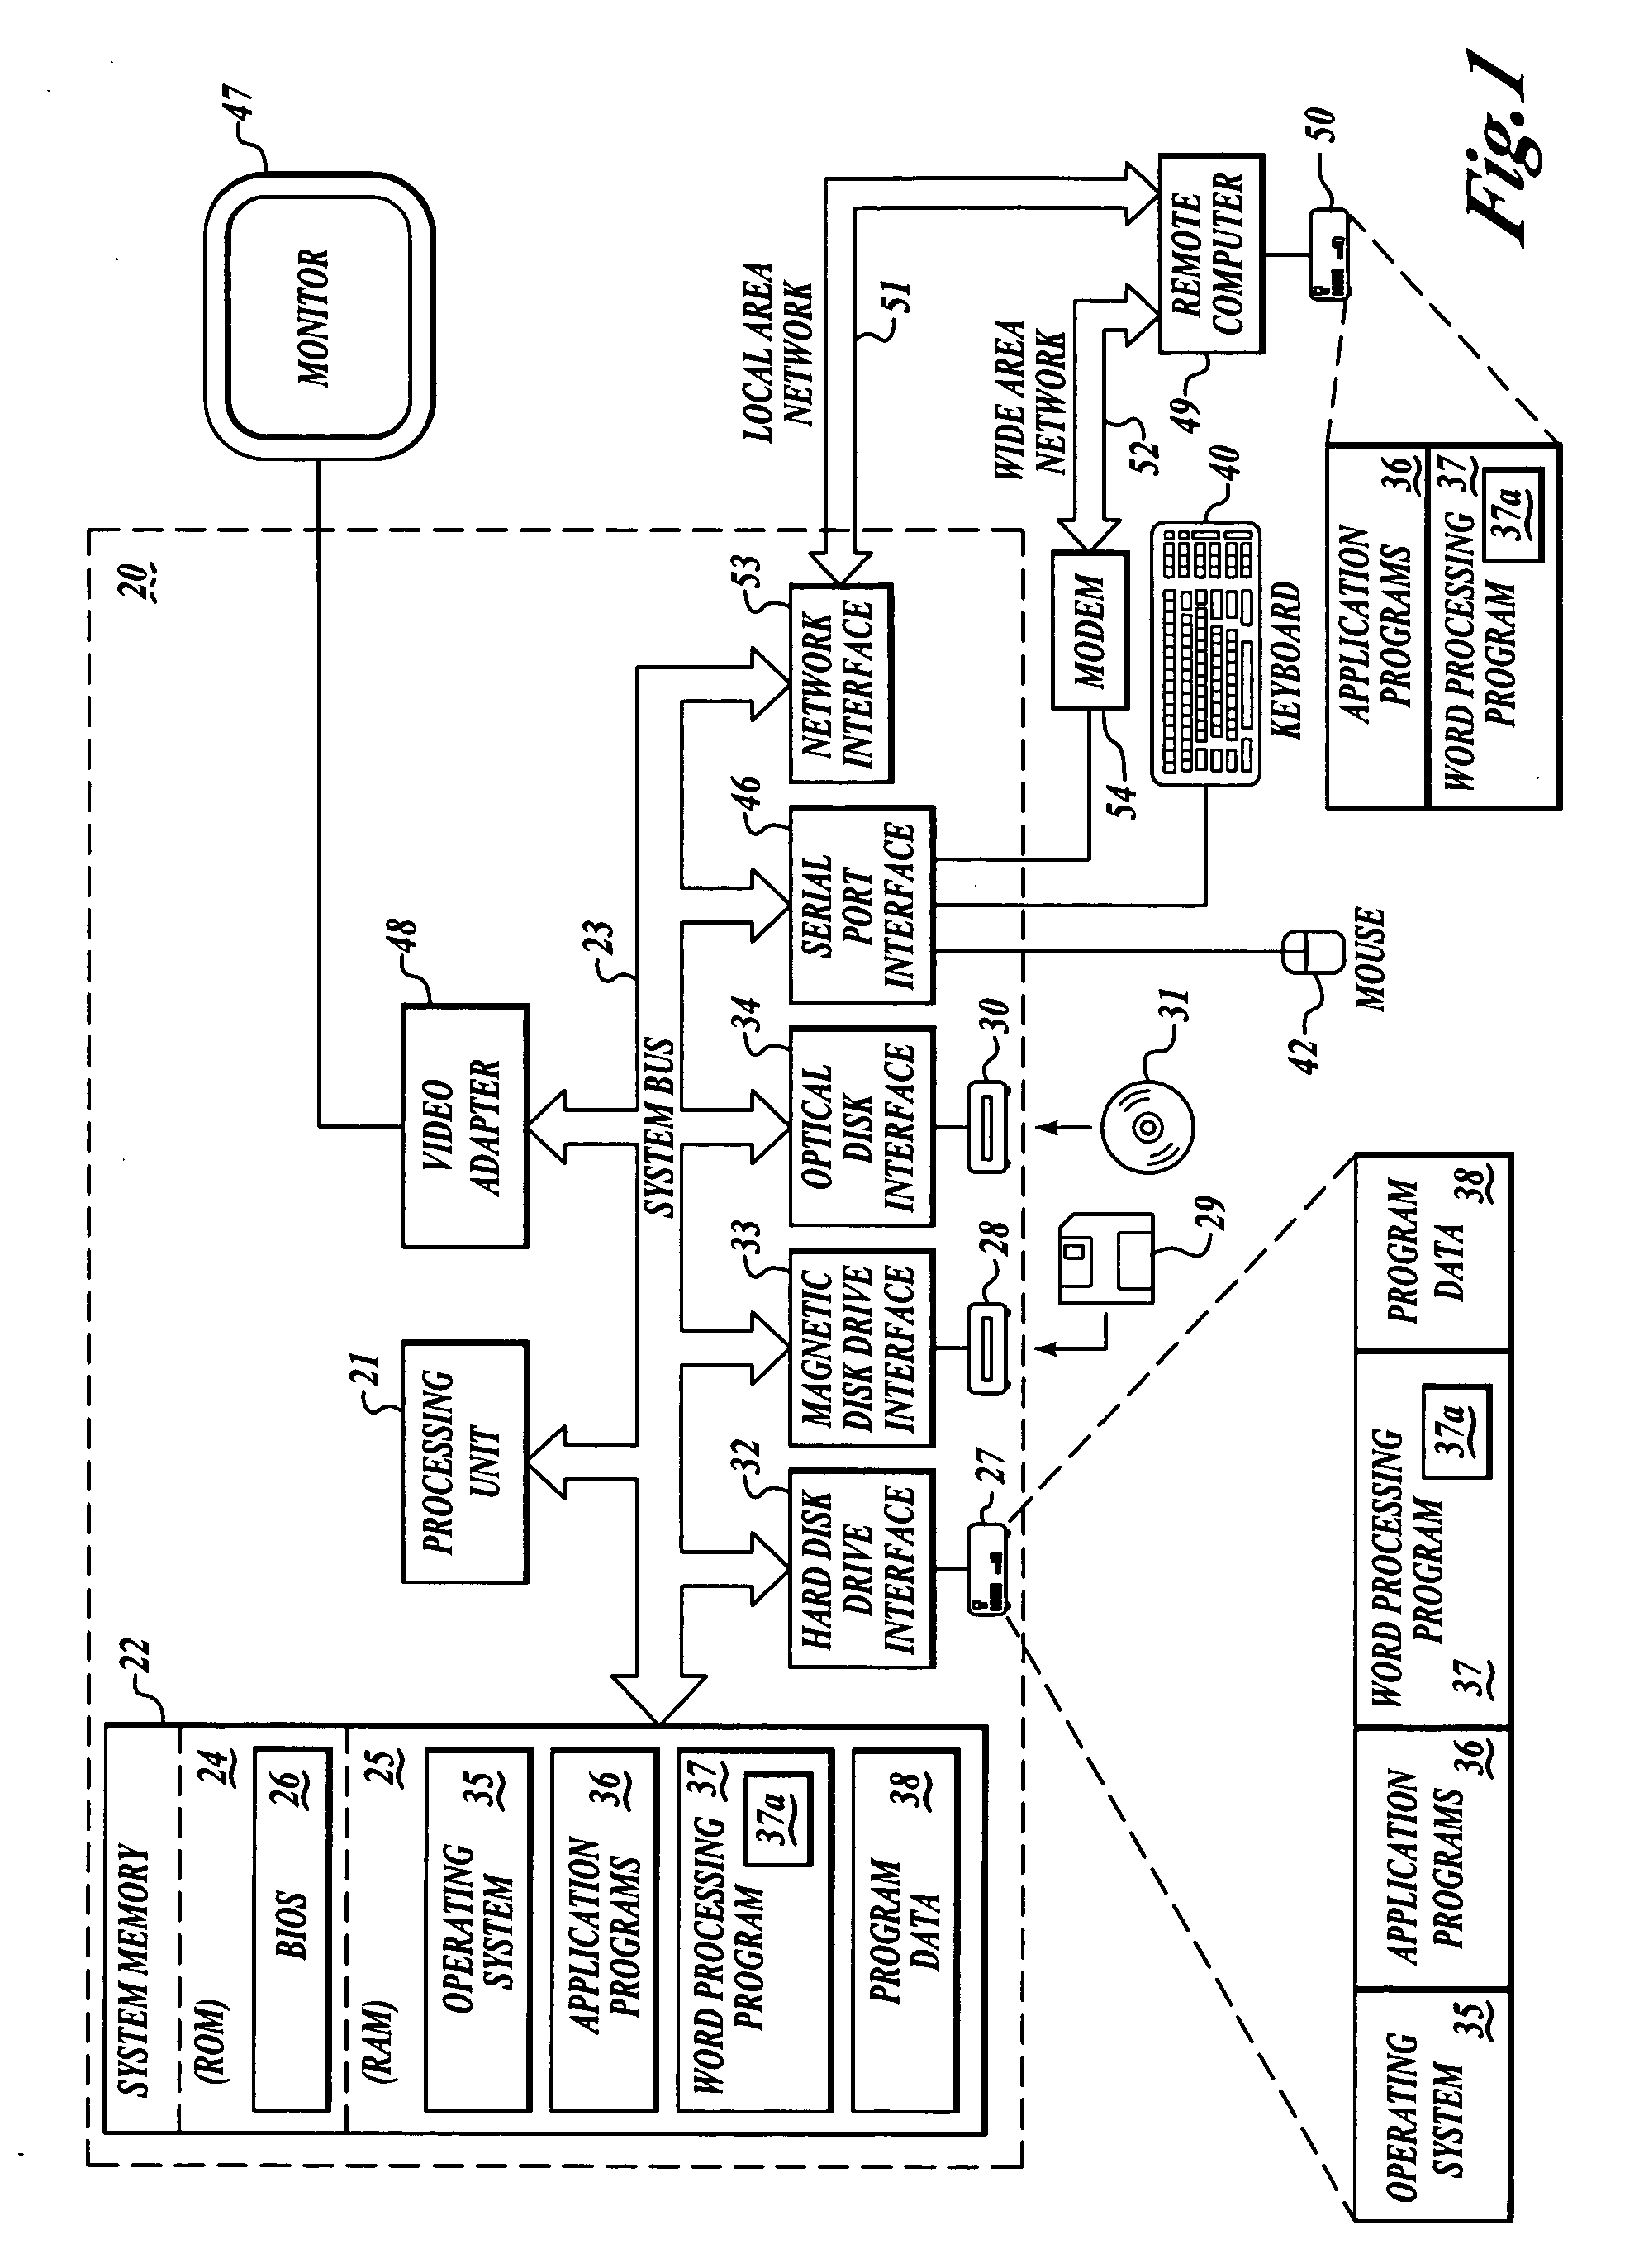 System and method for updating a table-of-contents in a frameset